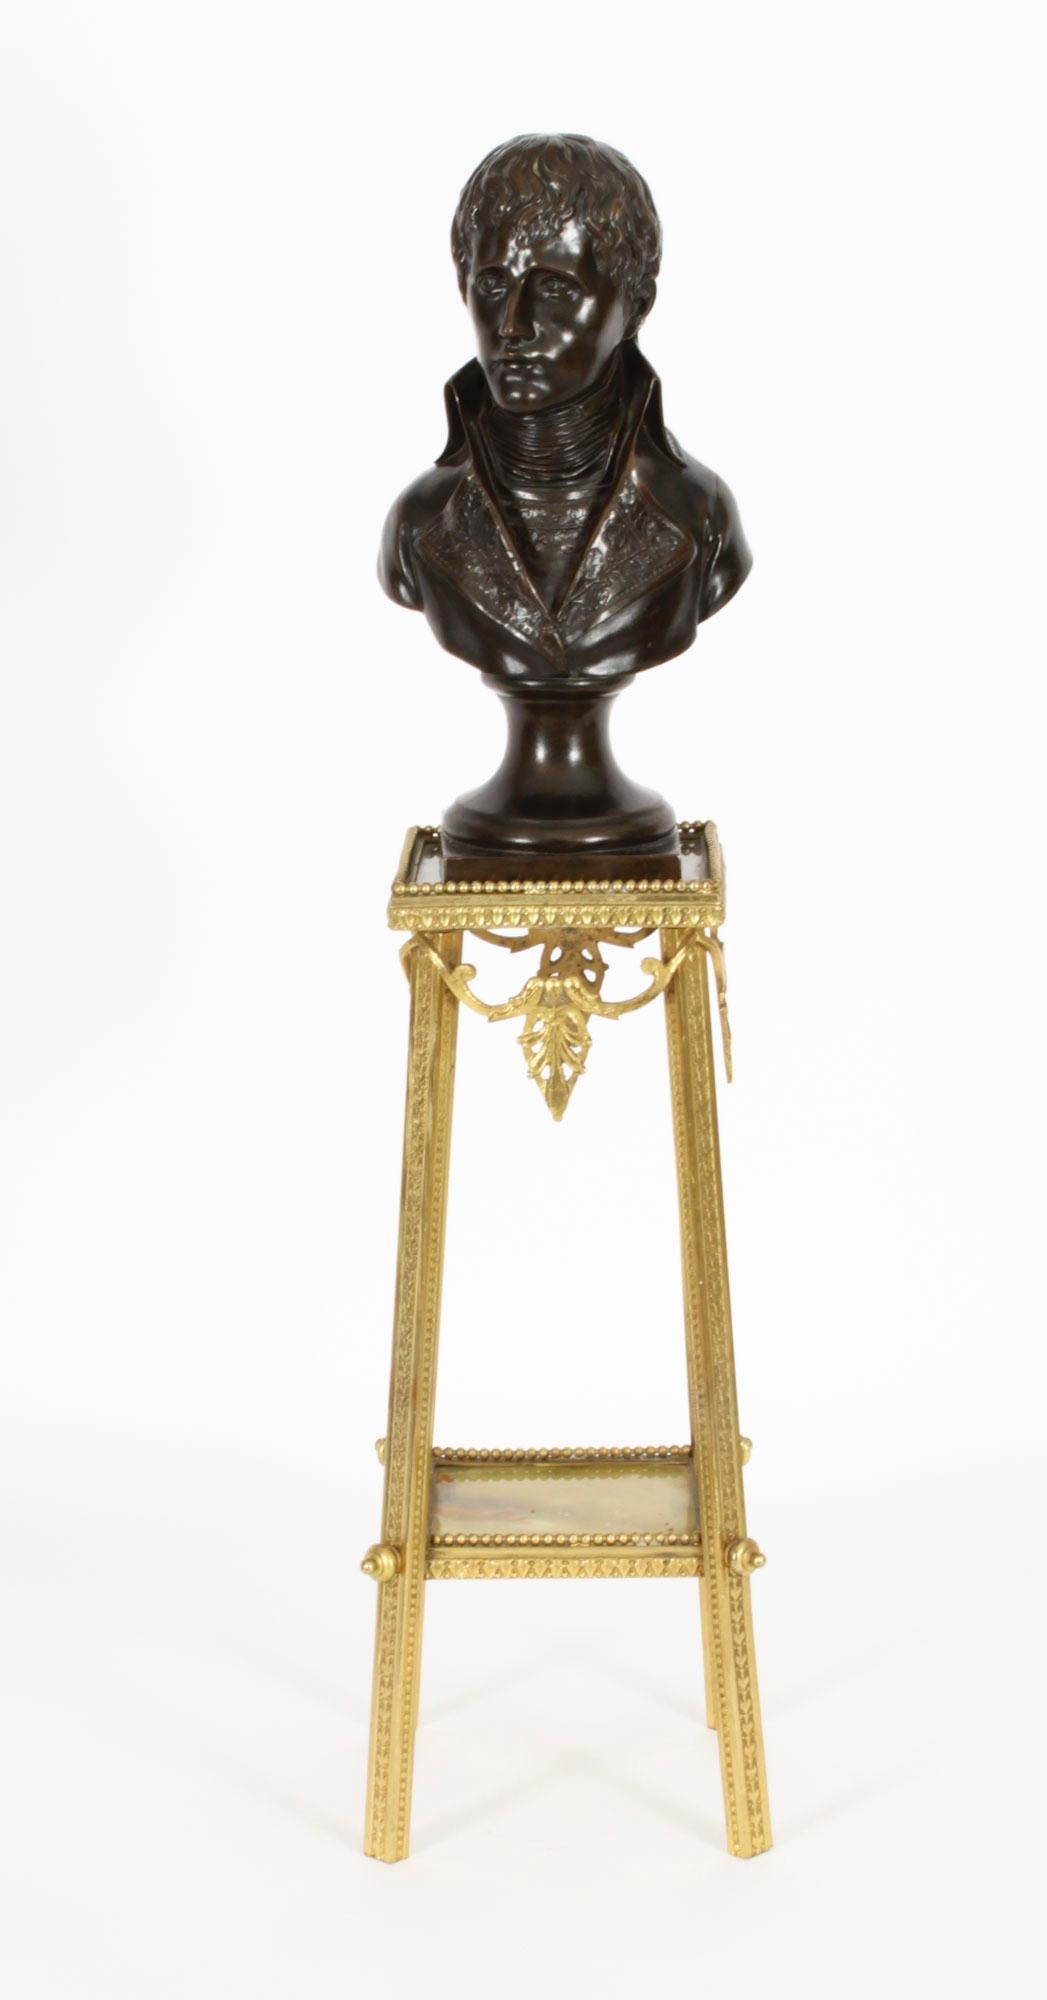 A fine quality antique French ormolu and onyx miniature pedestal table stand, Circa 1880 in date.
 
The pedestal with two square onyx tiers mounted in moulded and beaded bezels, raised on square-section supports with anthemion swags.

The sculpture